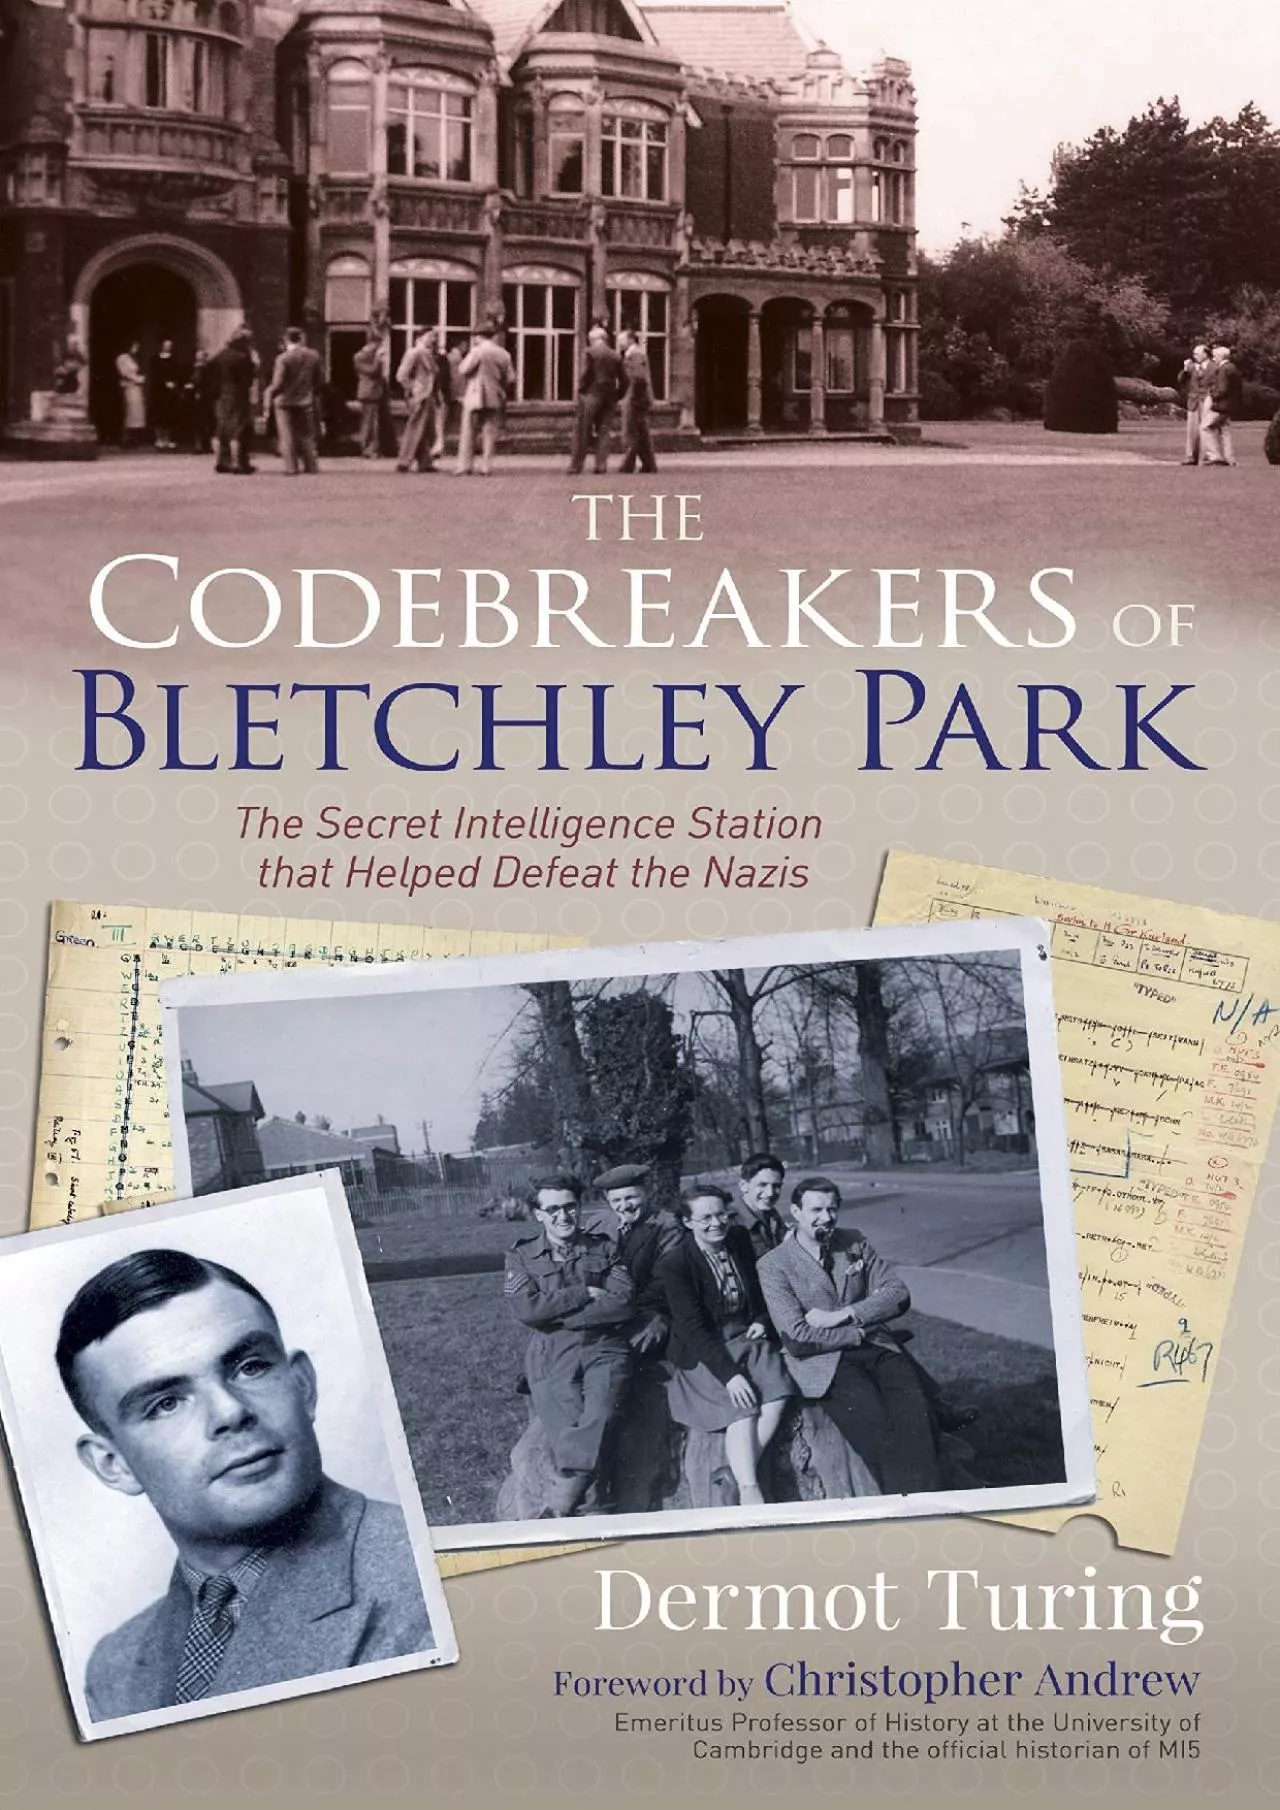 (DOWNLOAD)-The Codebreakers of Bletchley Park: The Secret Intelligence Station that Helped